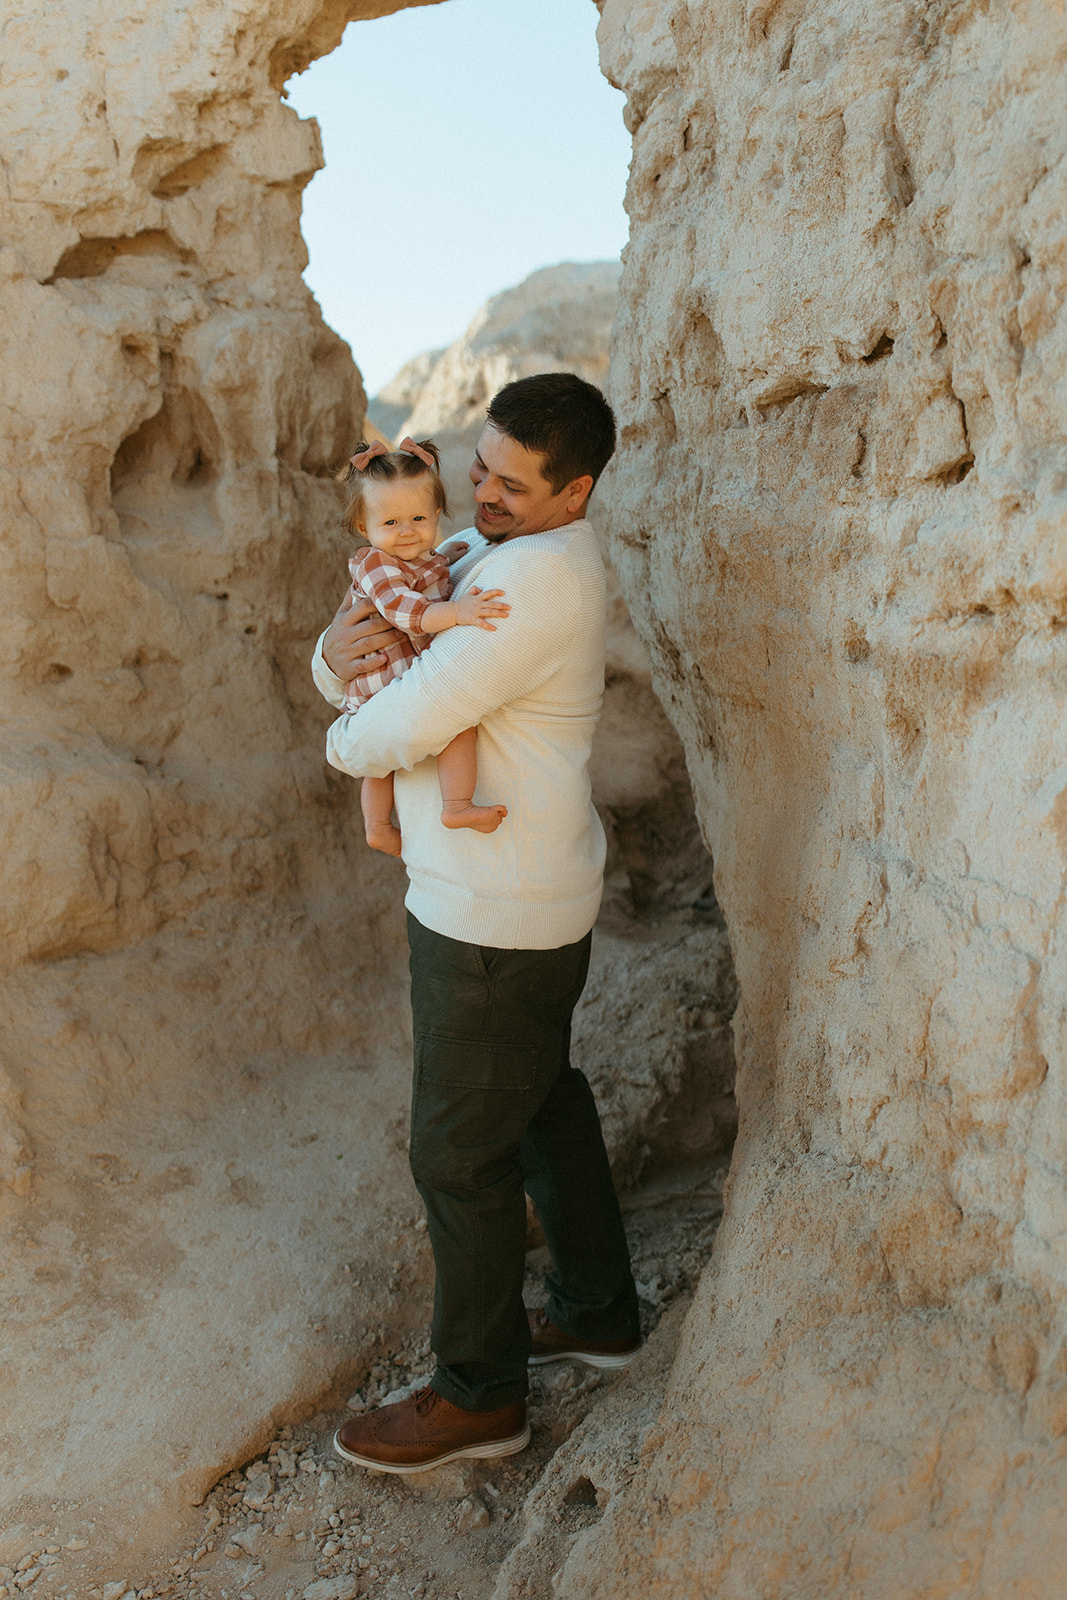 dad with baby girl in a rocky landscape